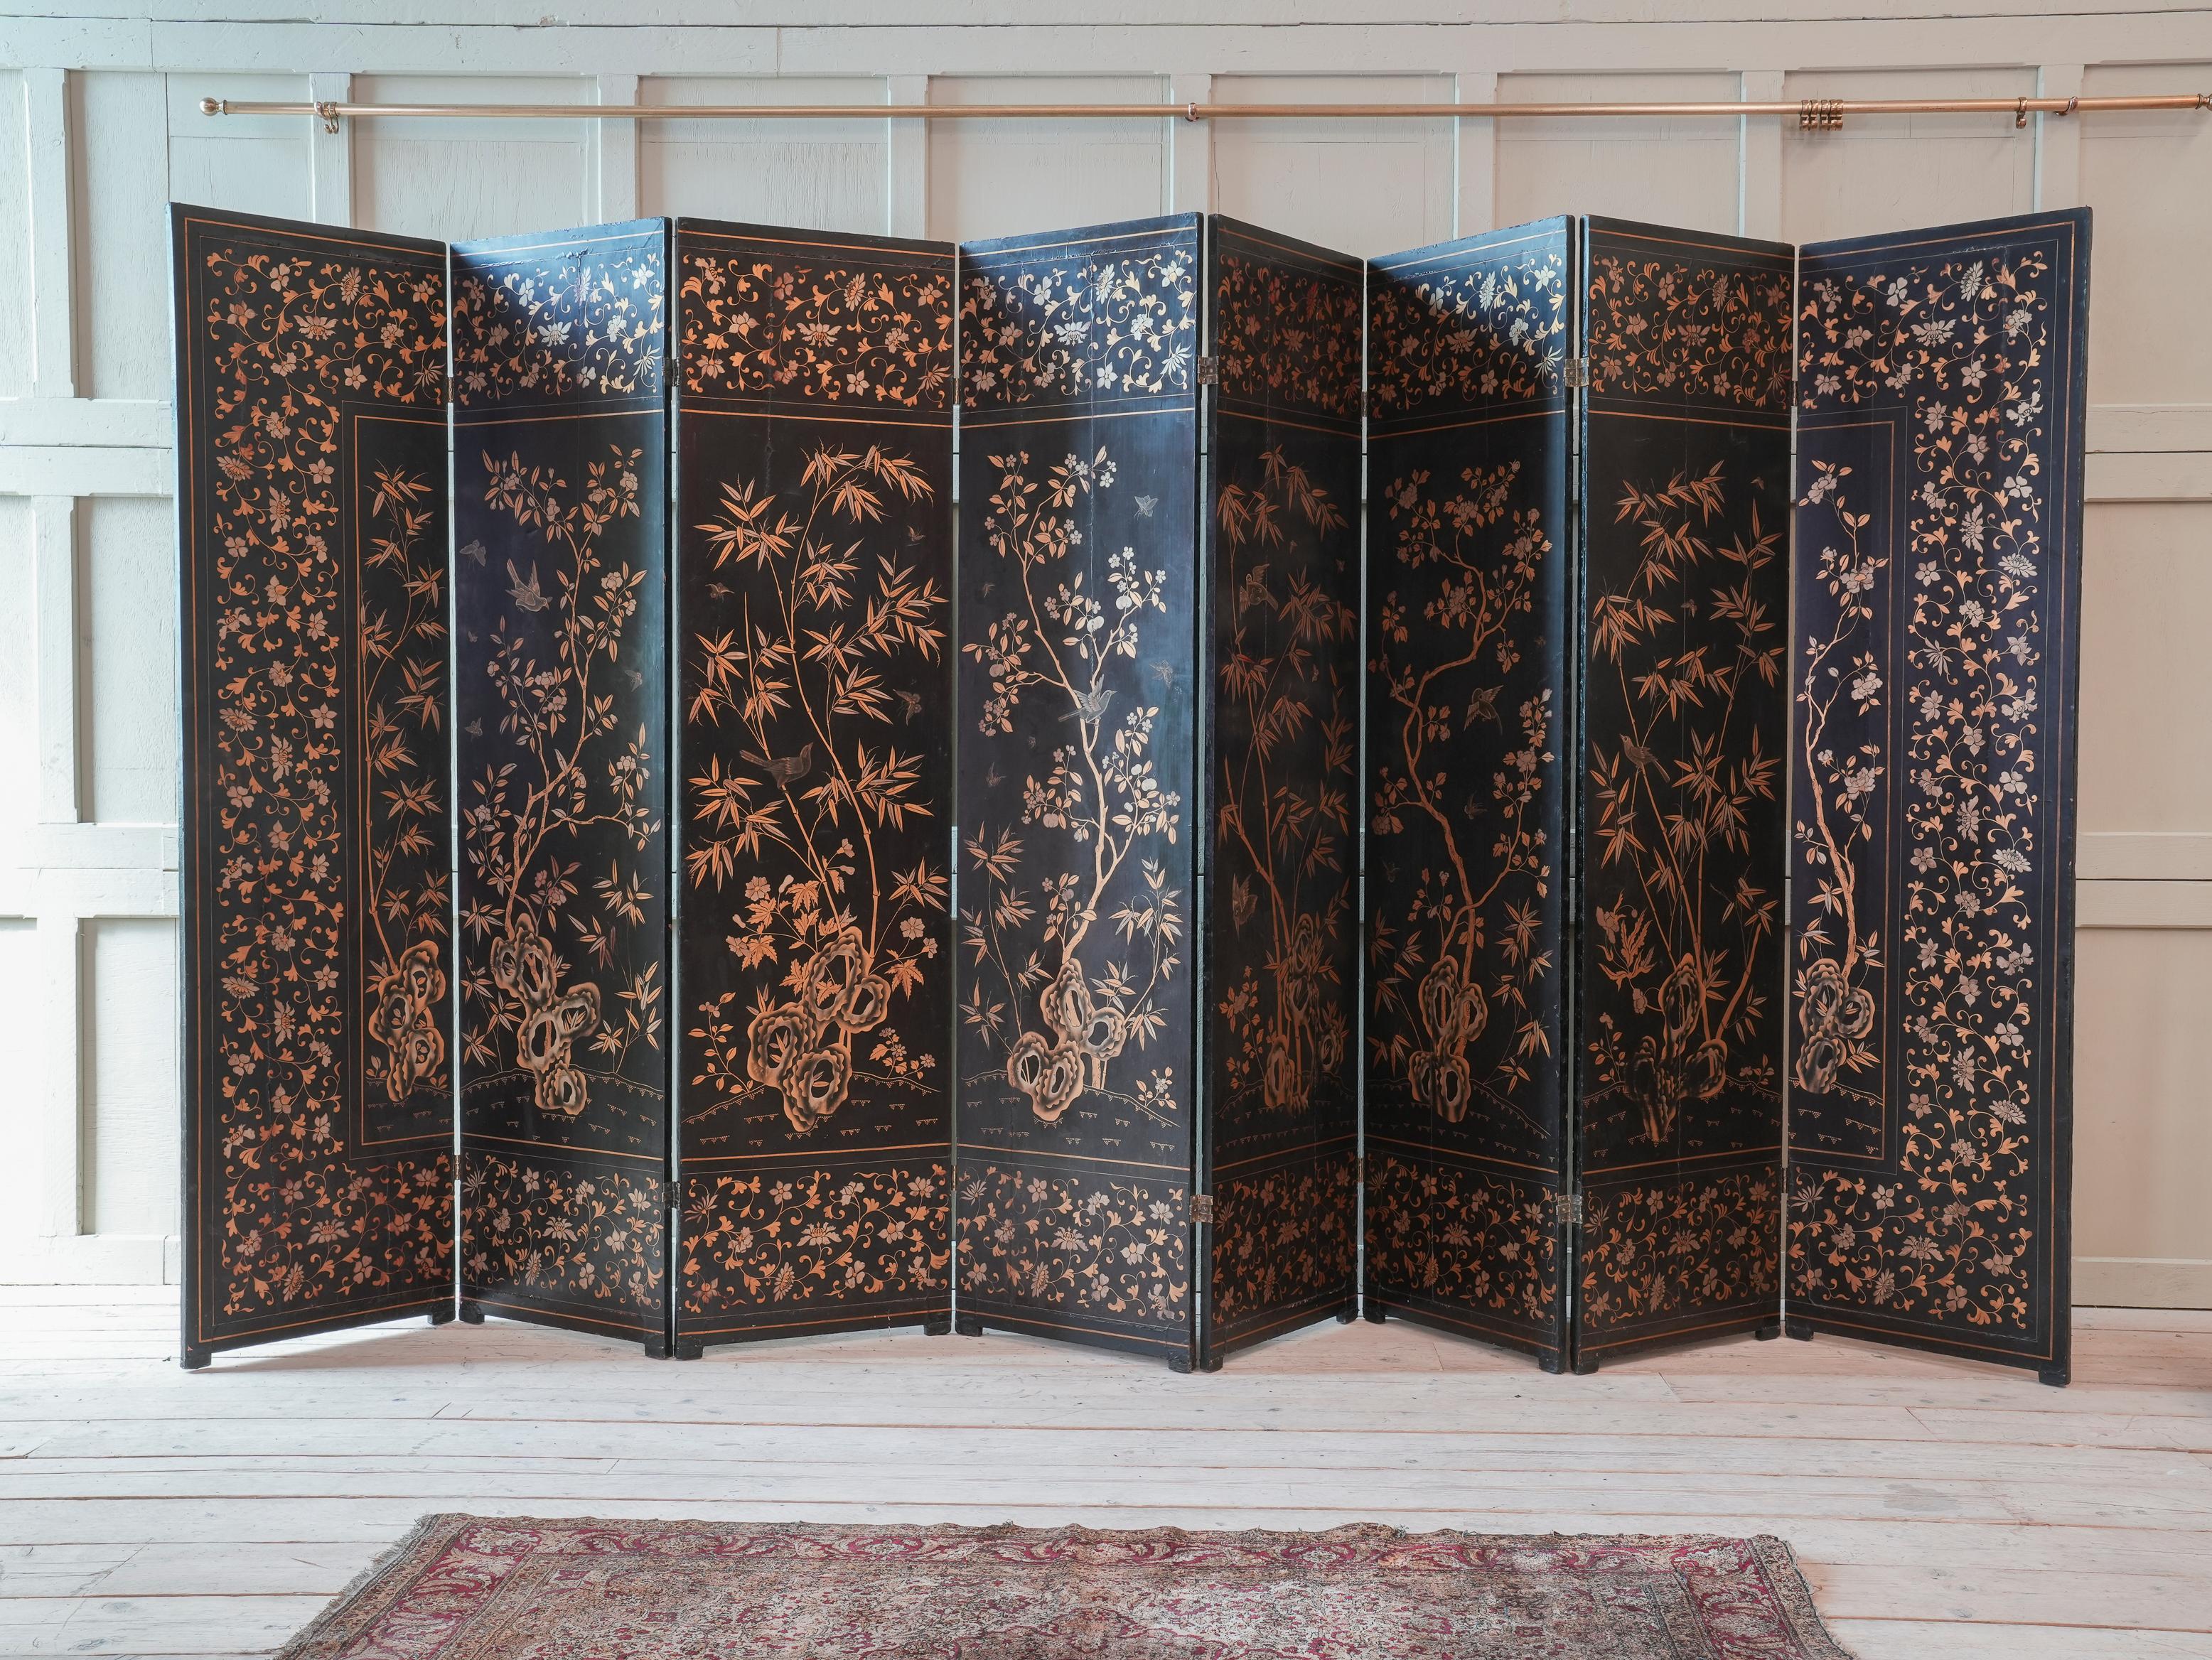 The black lacquered timber panels decorated with a sprawling landscape, figures, temples, animals, pagodas and junks within a border of trailing vines with exotic birds and butterflies in shades of black on a gold ground.

The reverse decorated